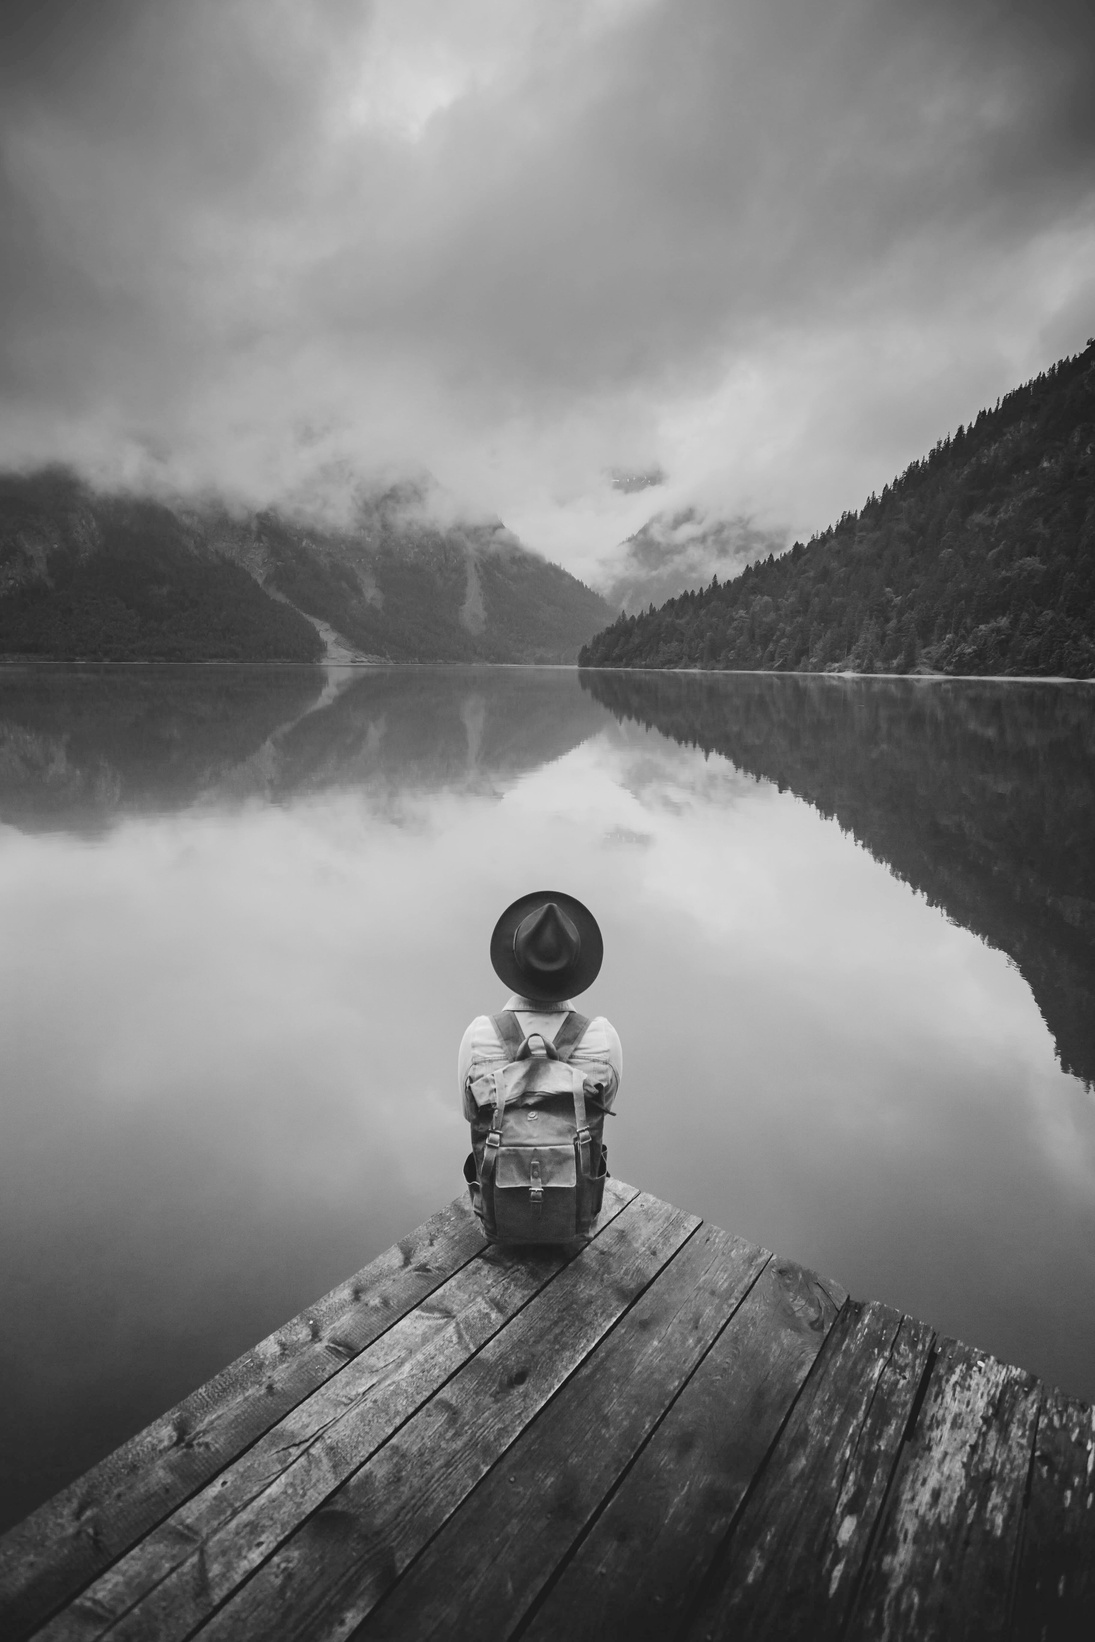 Child Sitting on Wooden Dock Overlooking the Lake